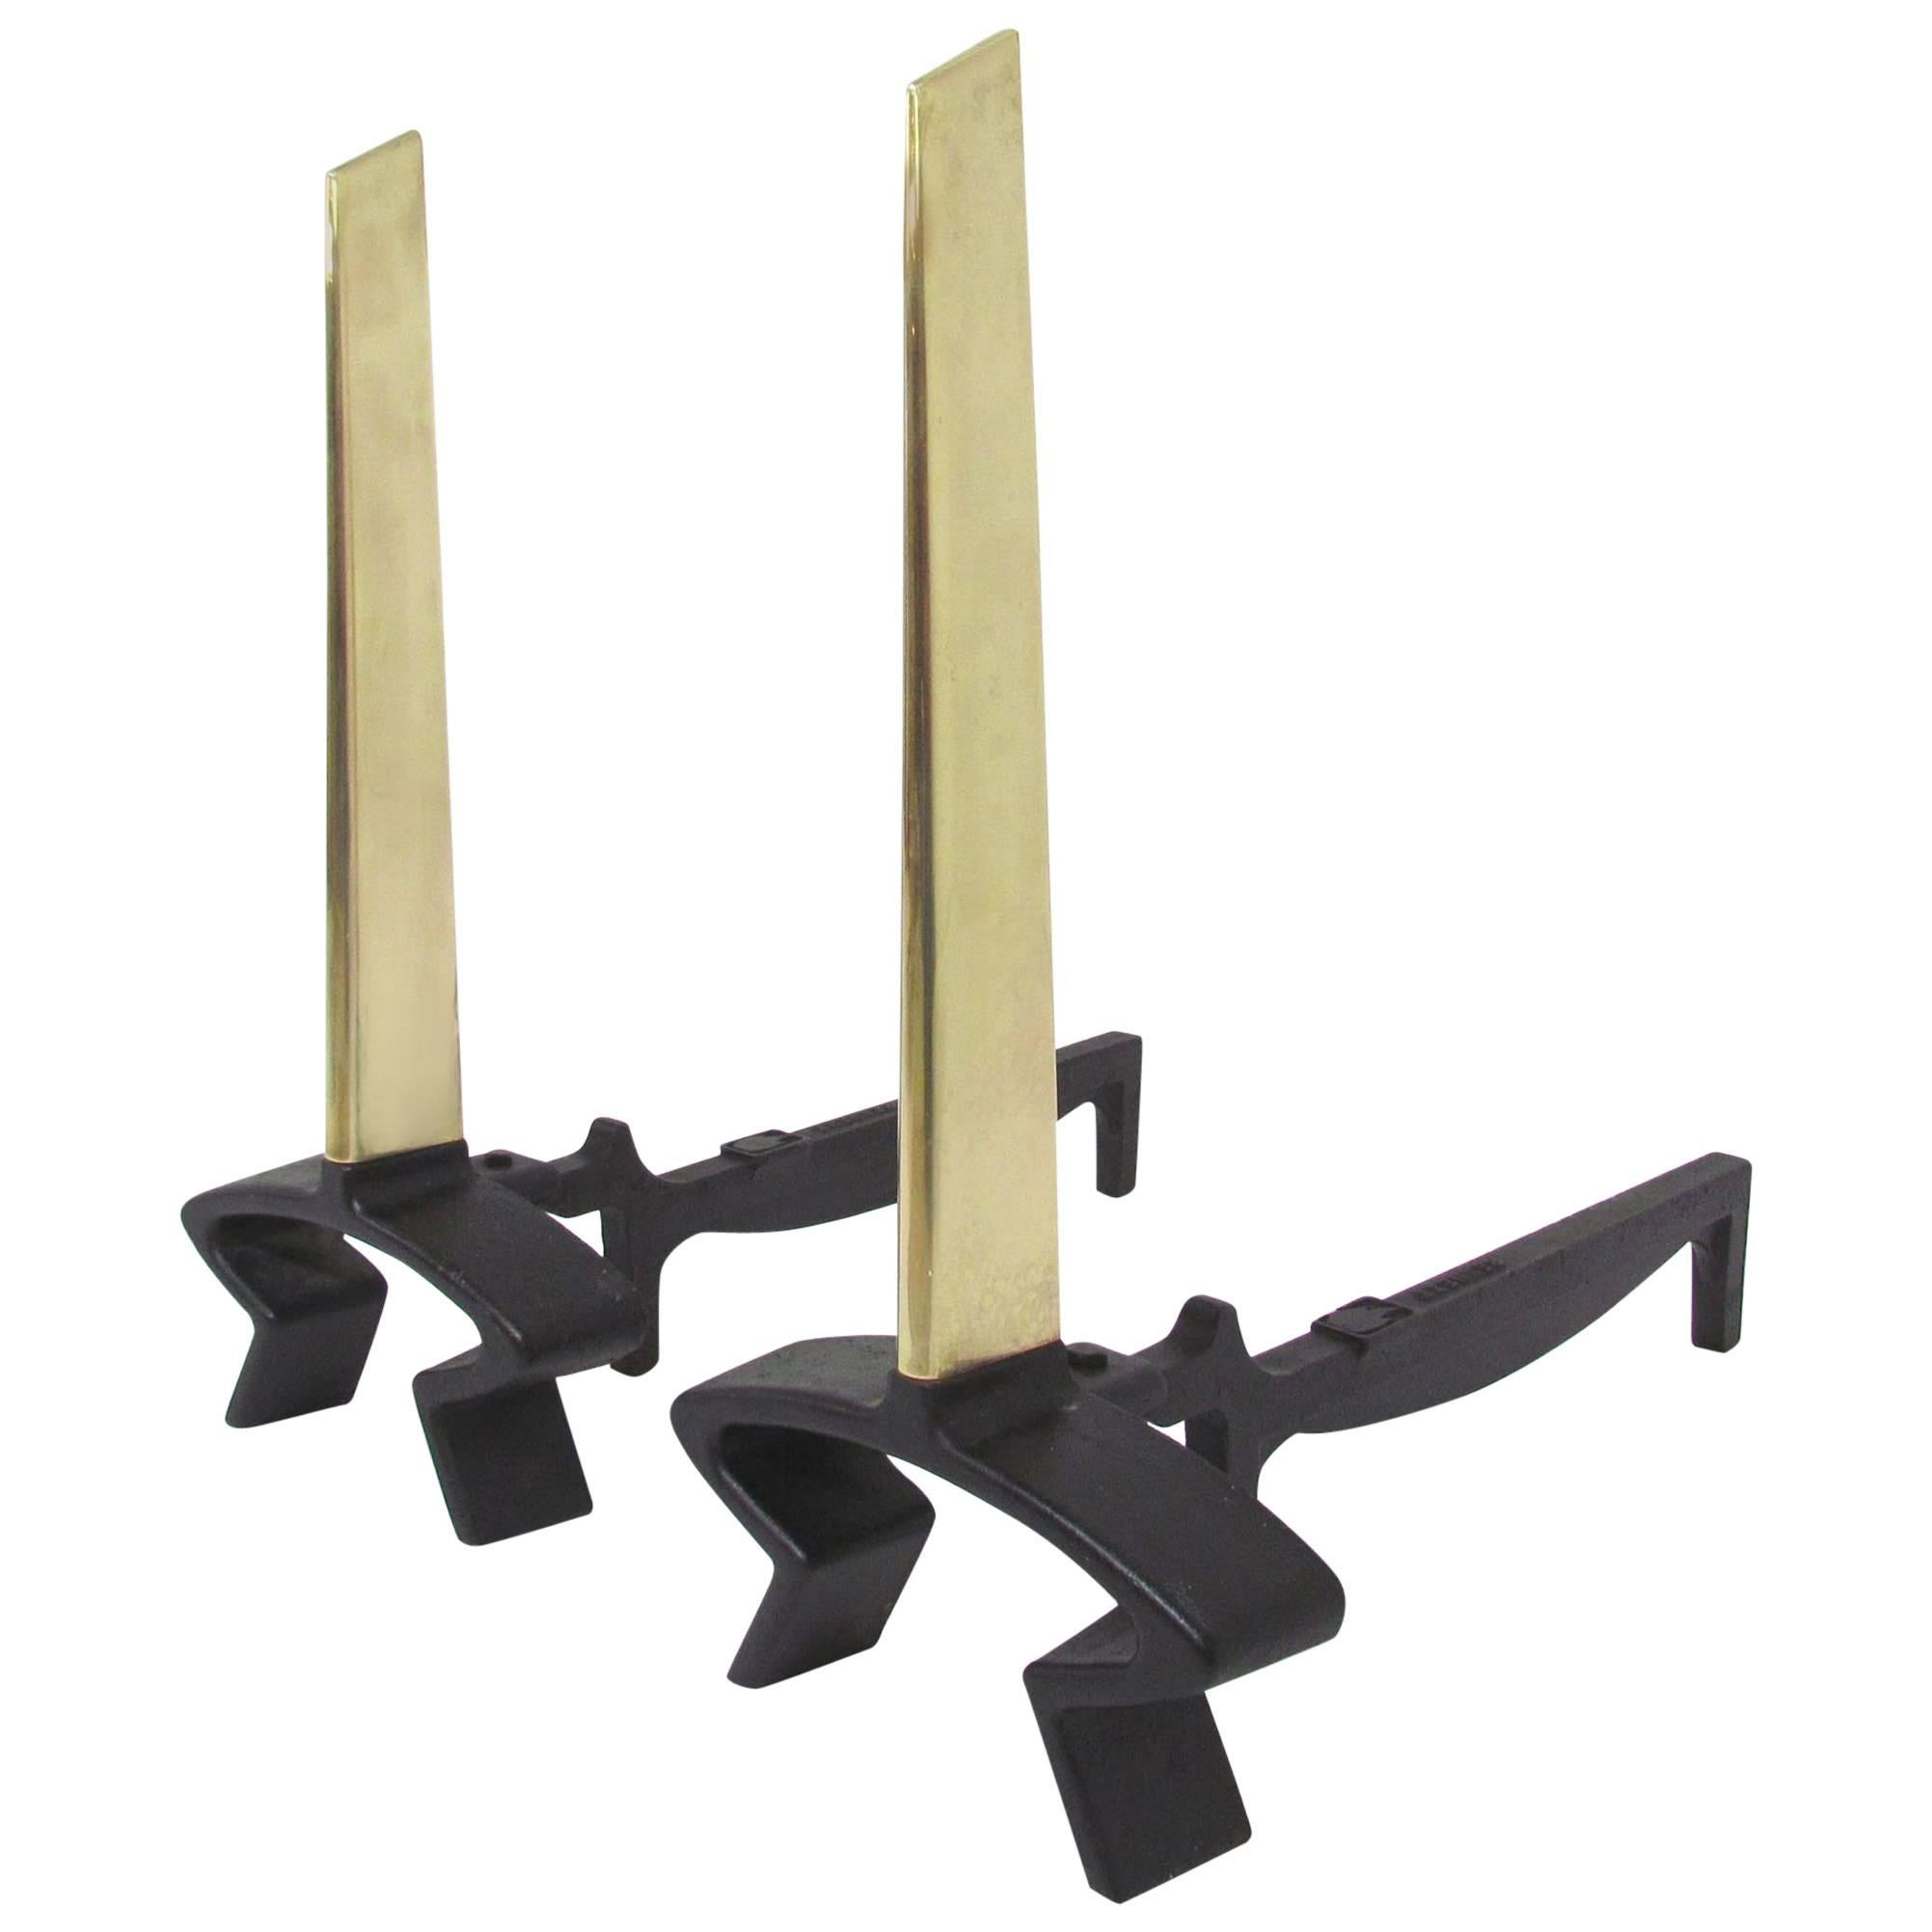 Modernist Donald Deskey Andirons for Bennett in Brass and Forged Iron